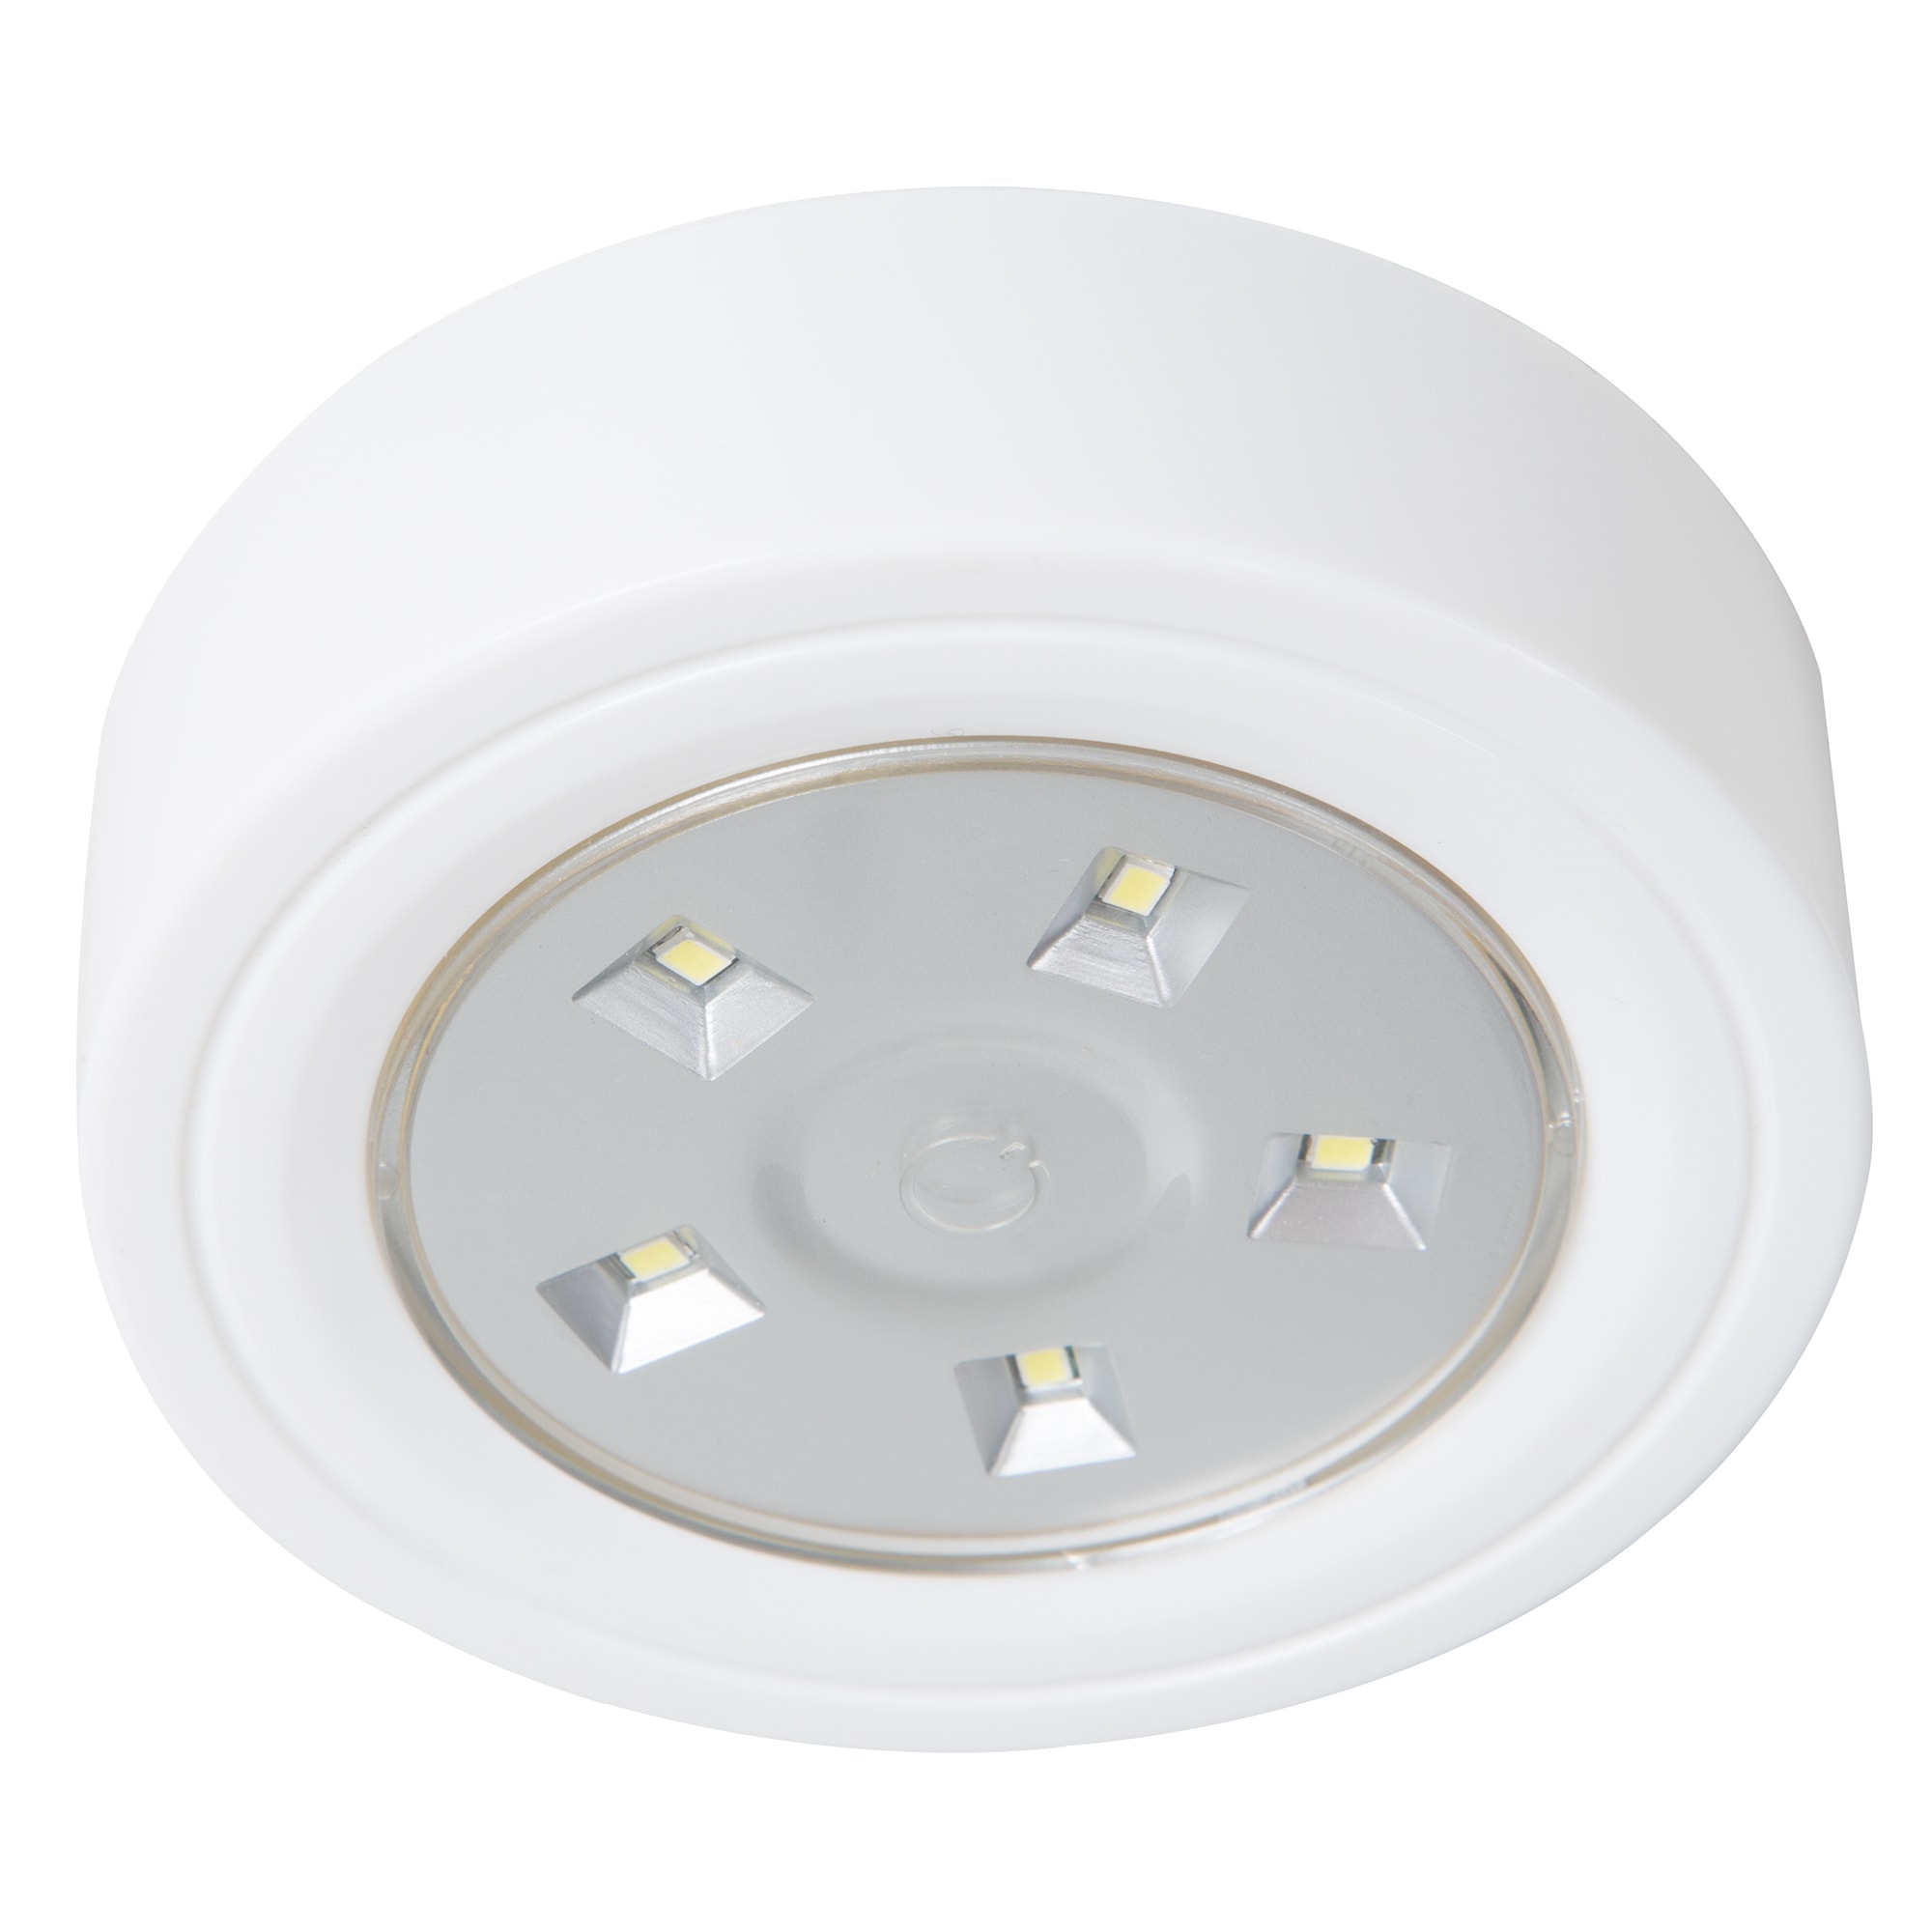 Lavish Home 5 Led Portable Puck And Ceiling Light With Remote Control